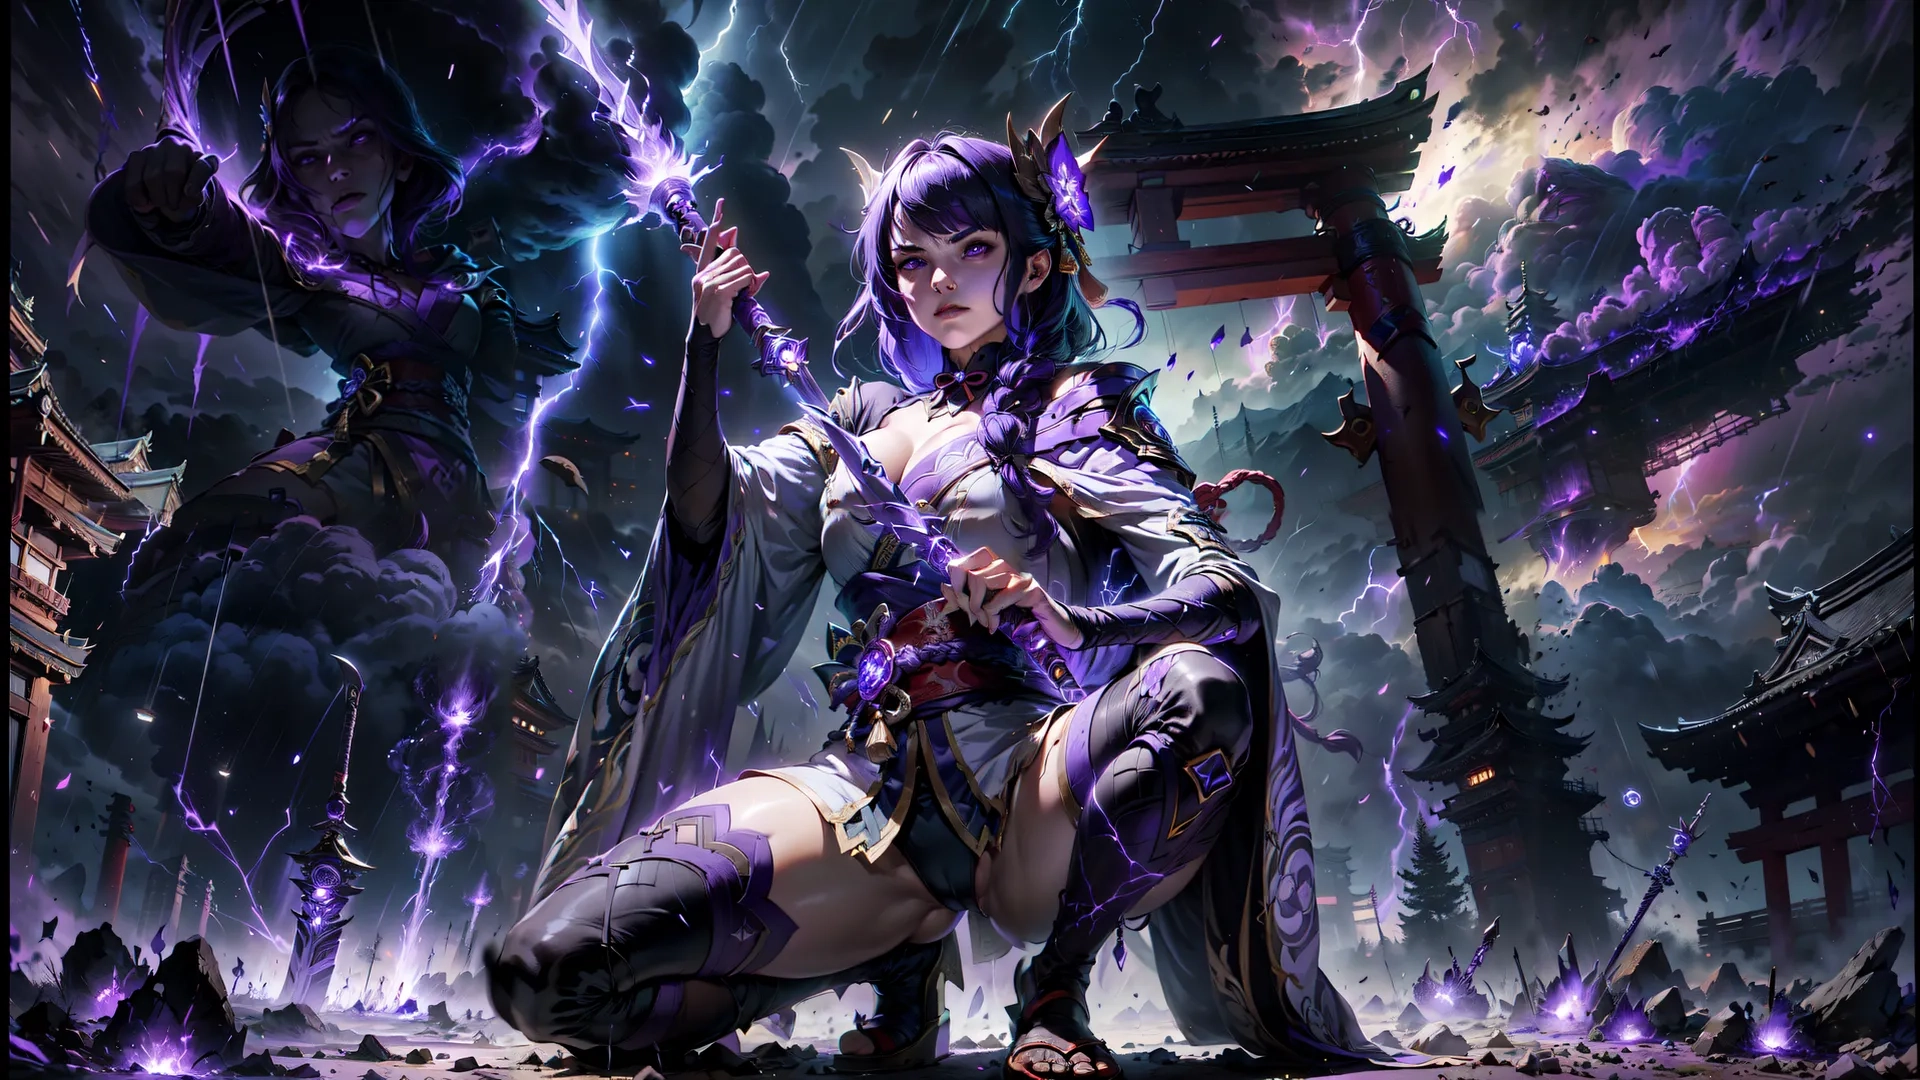 a woman dressed in purple and holding a staff, posing on some rocks in the ground with lightning and clouds in the background behind her
